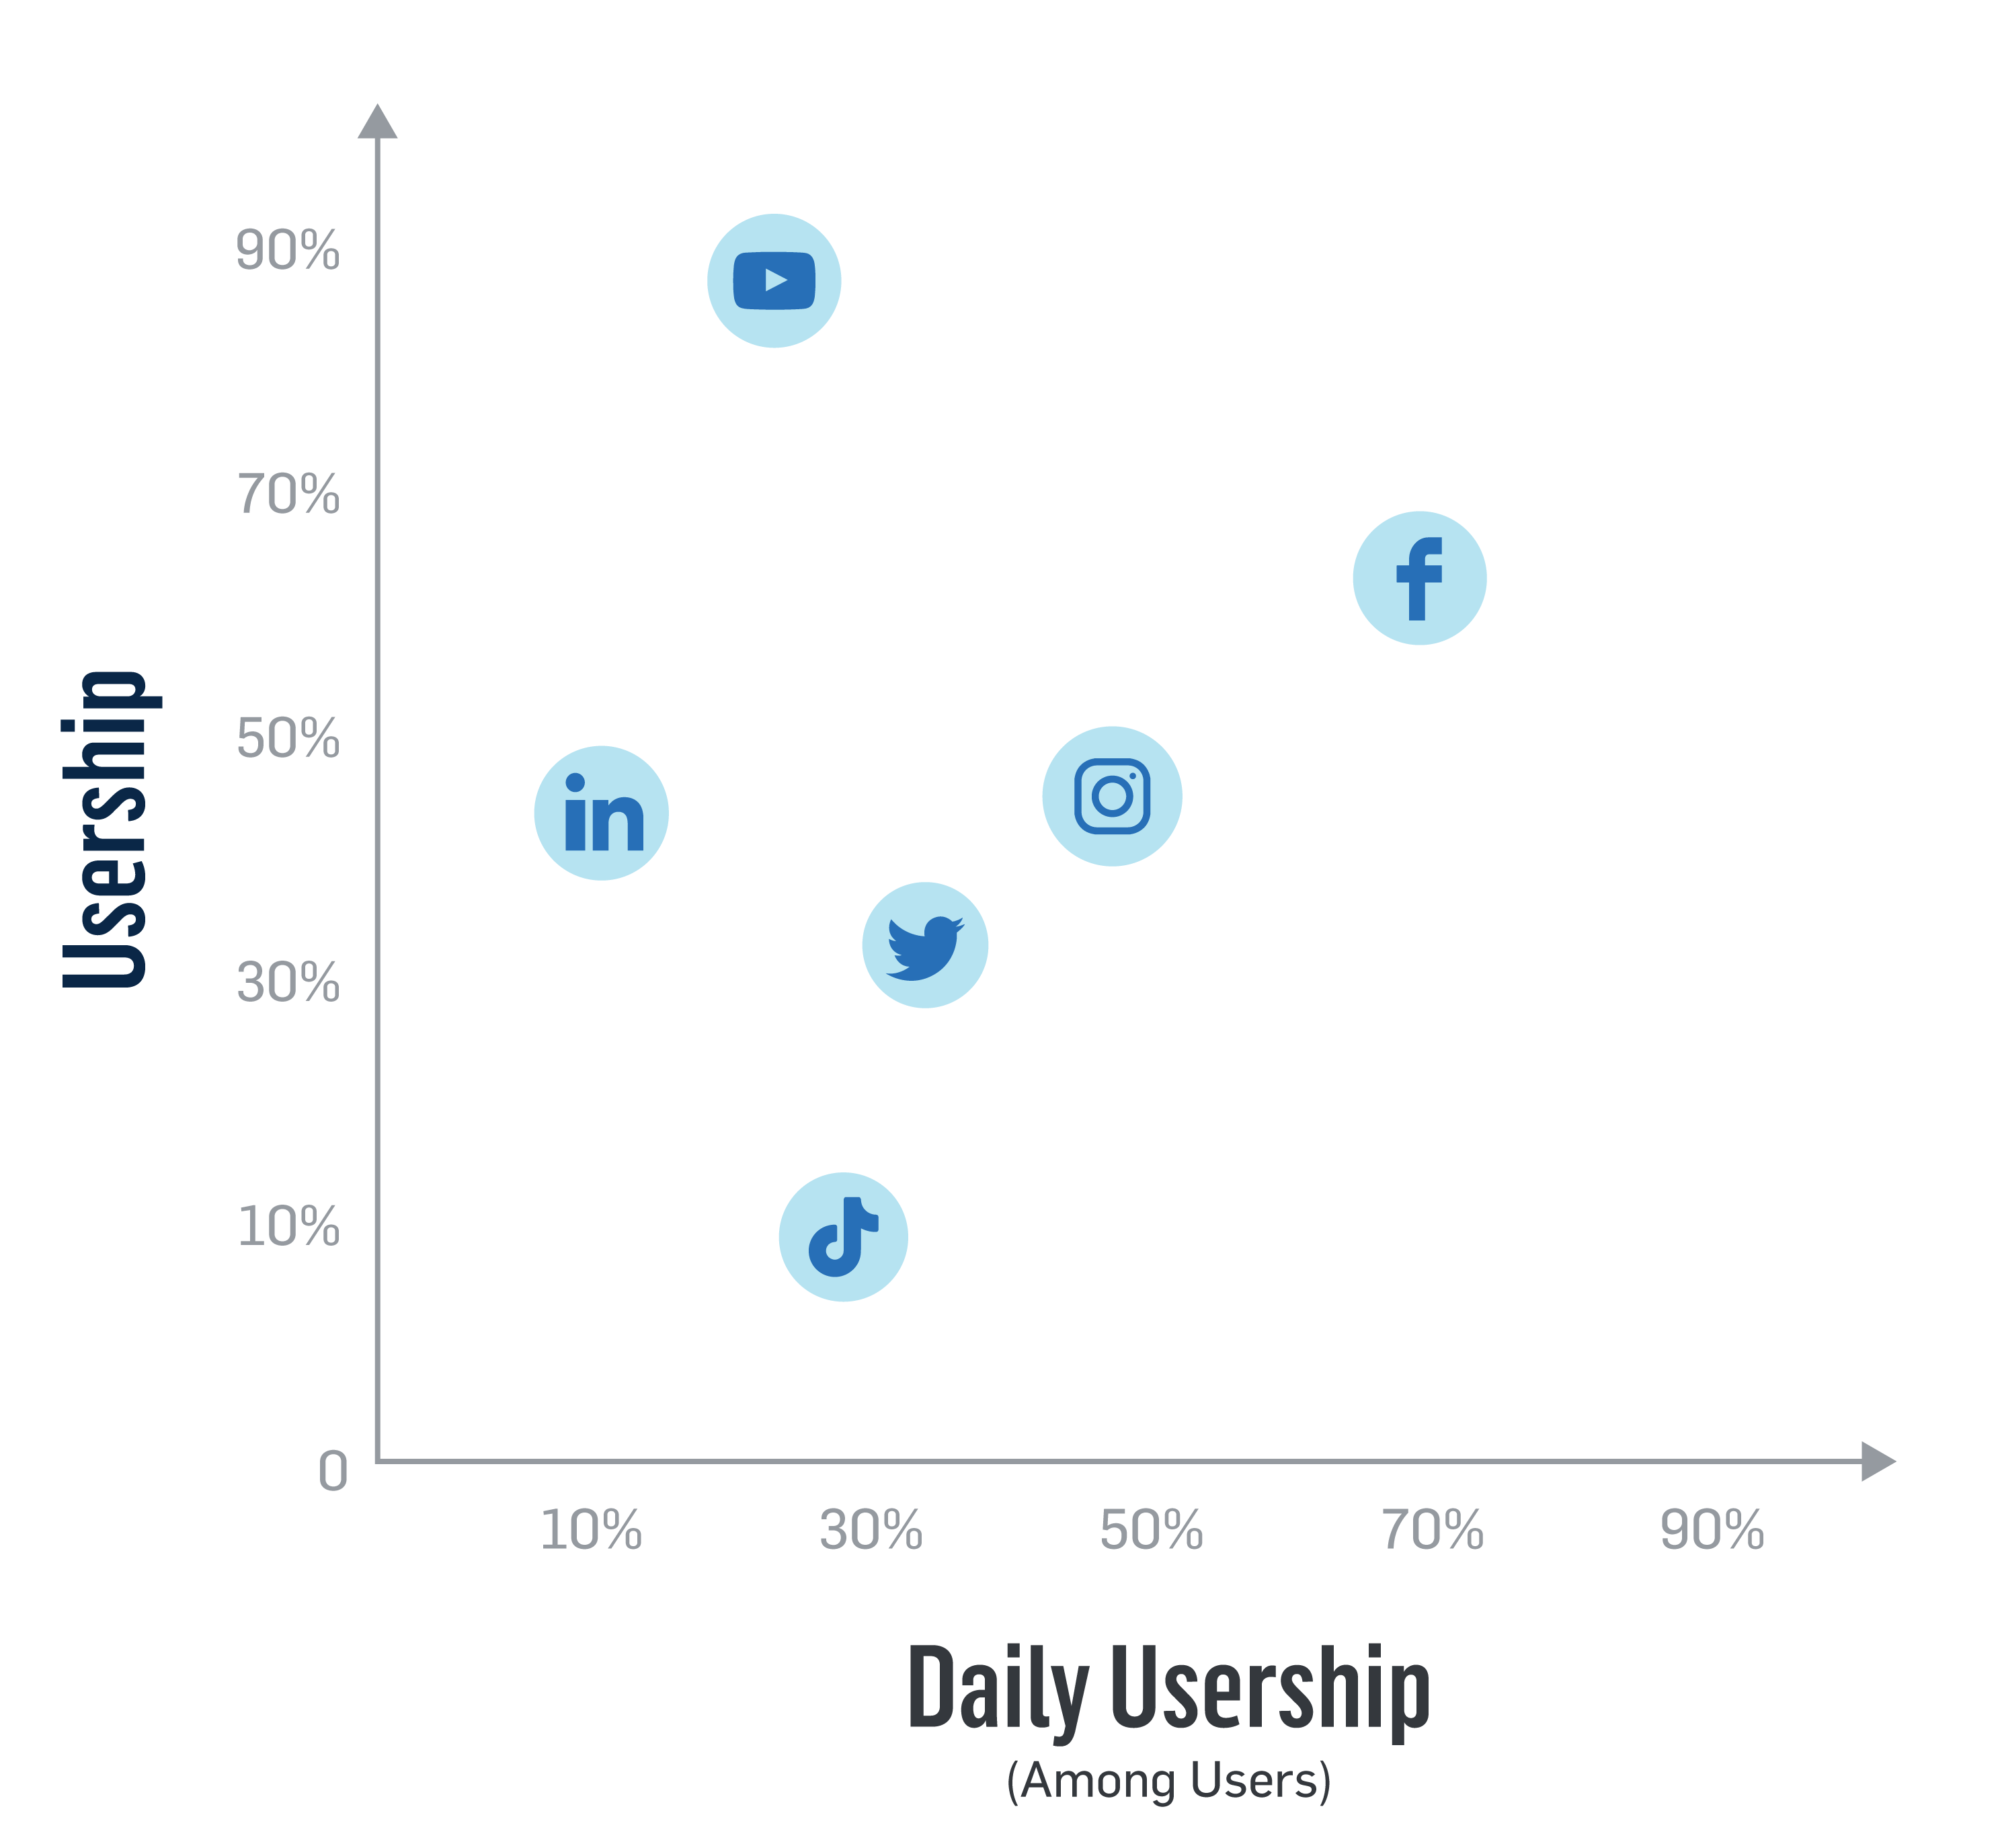 Graph showing social platforms ranked by overall usership and daily usership.